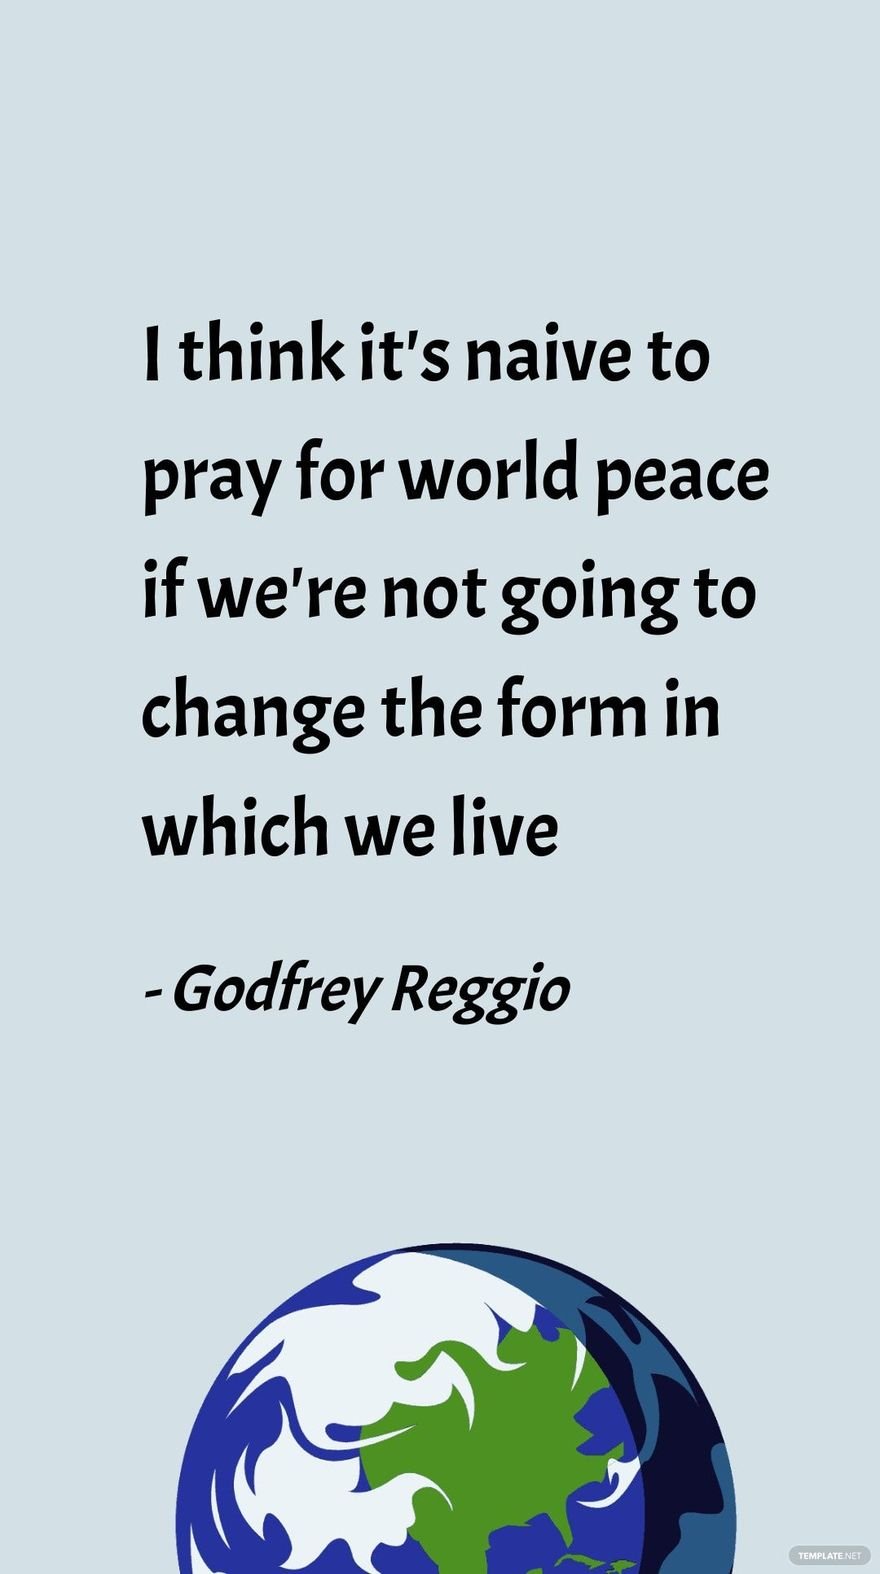 Godfrey Reggio - I think it's naive to pray for world peace if we're not going to change the form in which we live